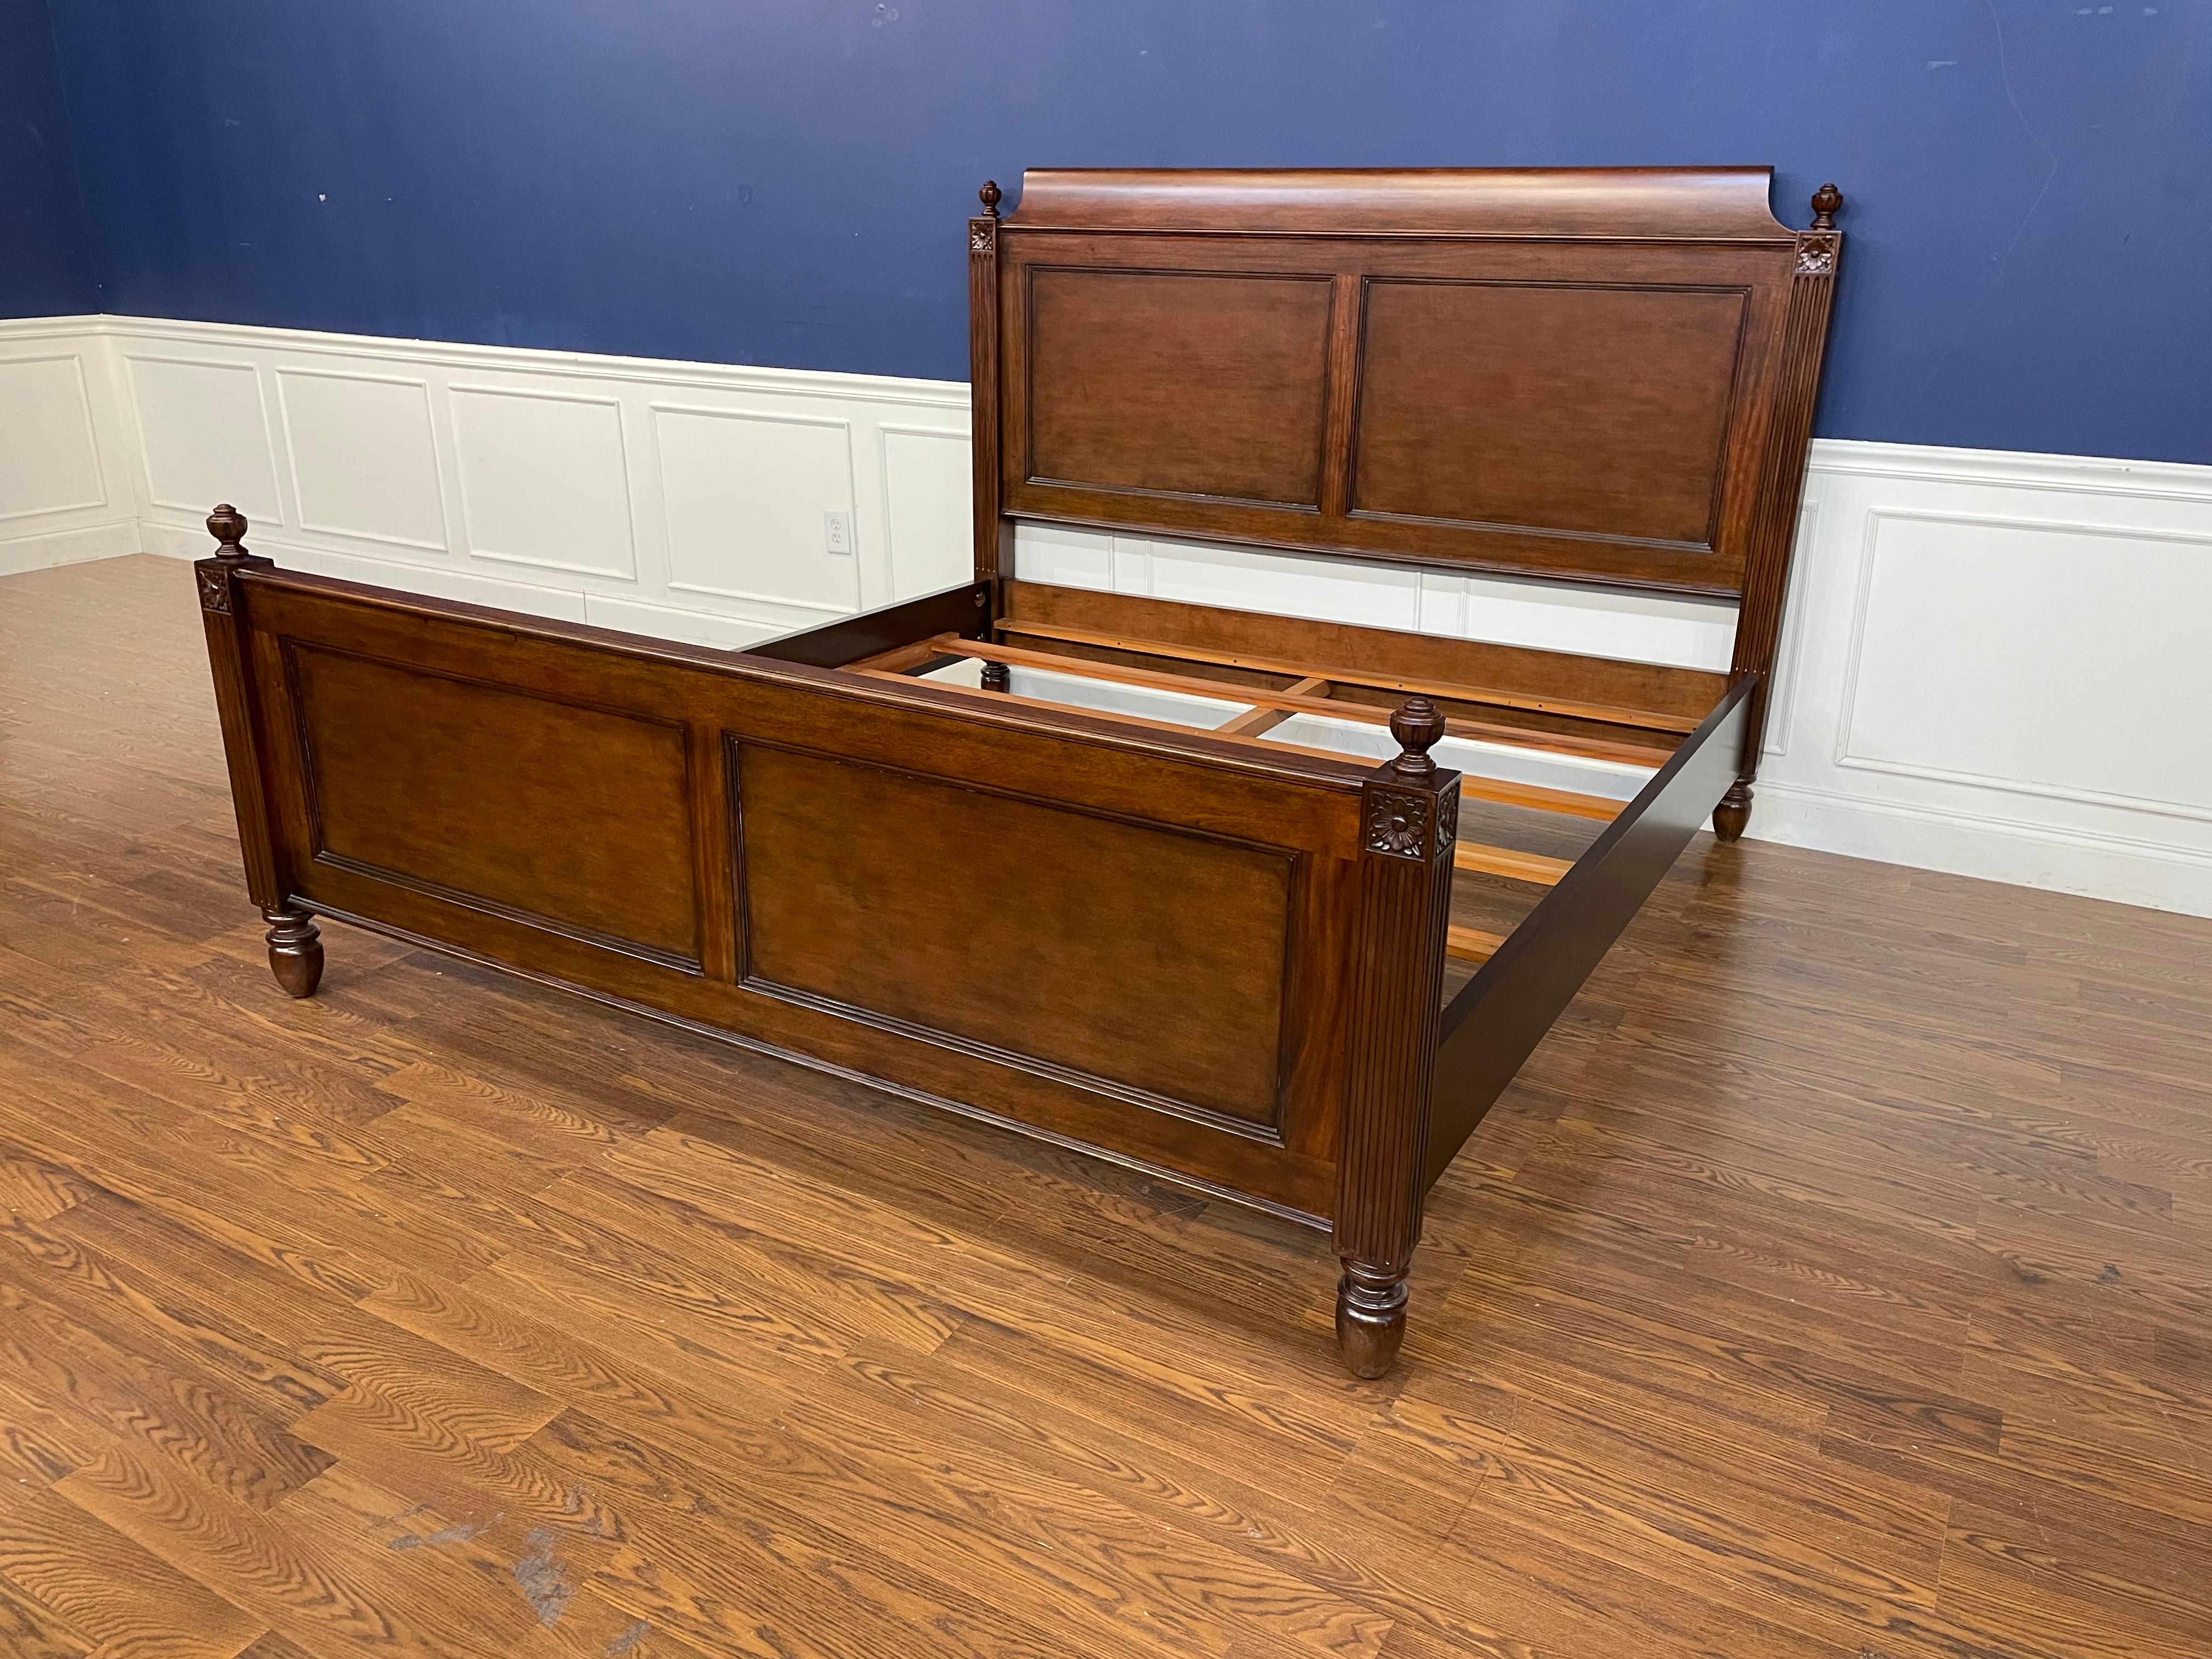 This is a Louis XVI style king size mahogany bed by Leighton Hall.  It has classic Louis XVI styling with fluted posts and finials and a paneled headboard and paneled footboard.  
Dimensions:
Length: 88.5”
Width: 82.25”
Headboard Height: